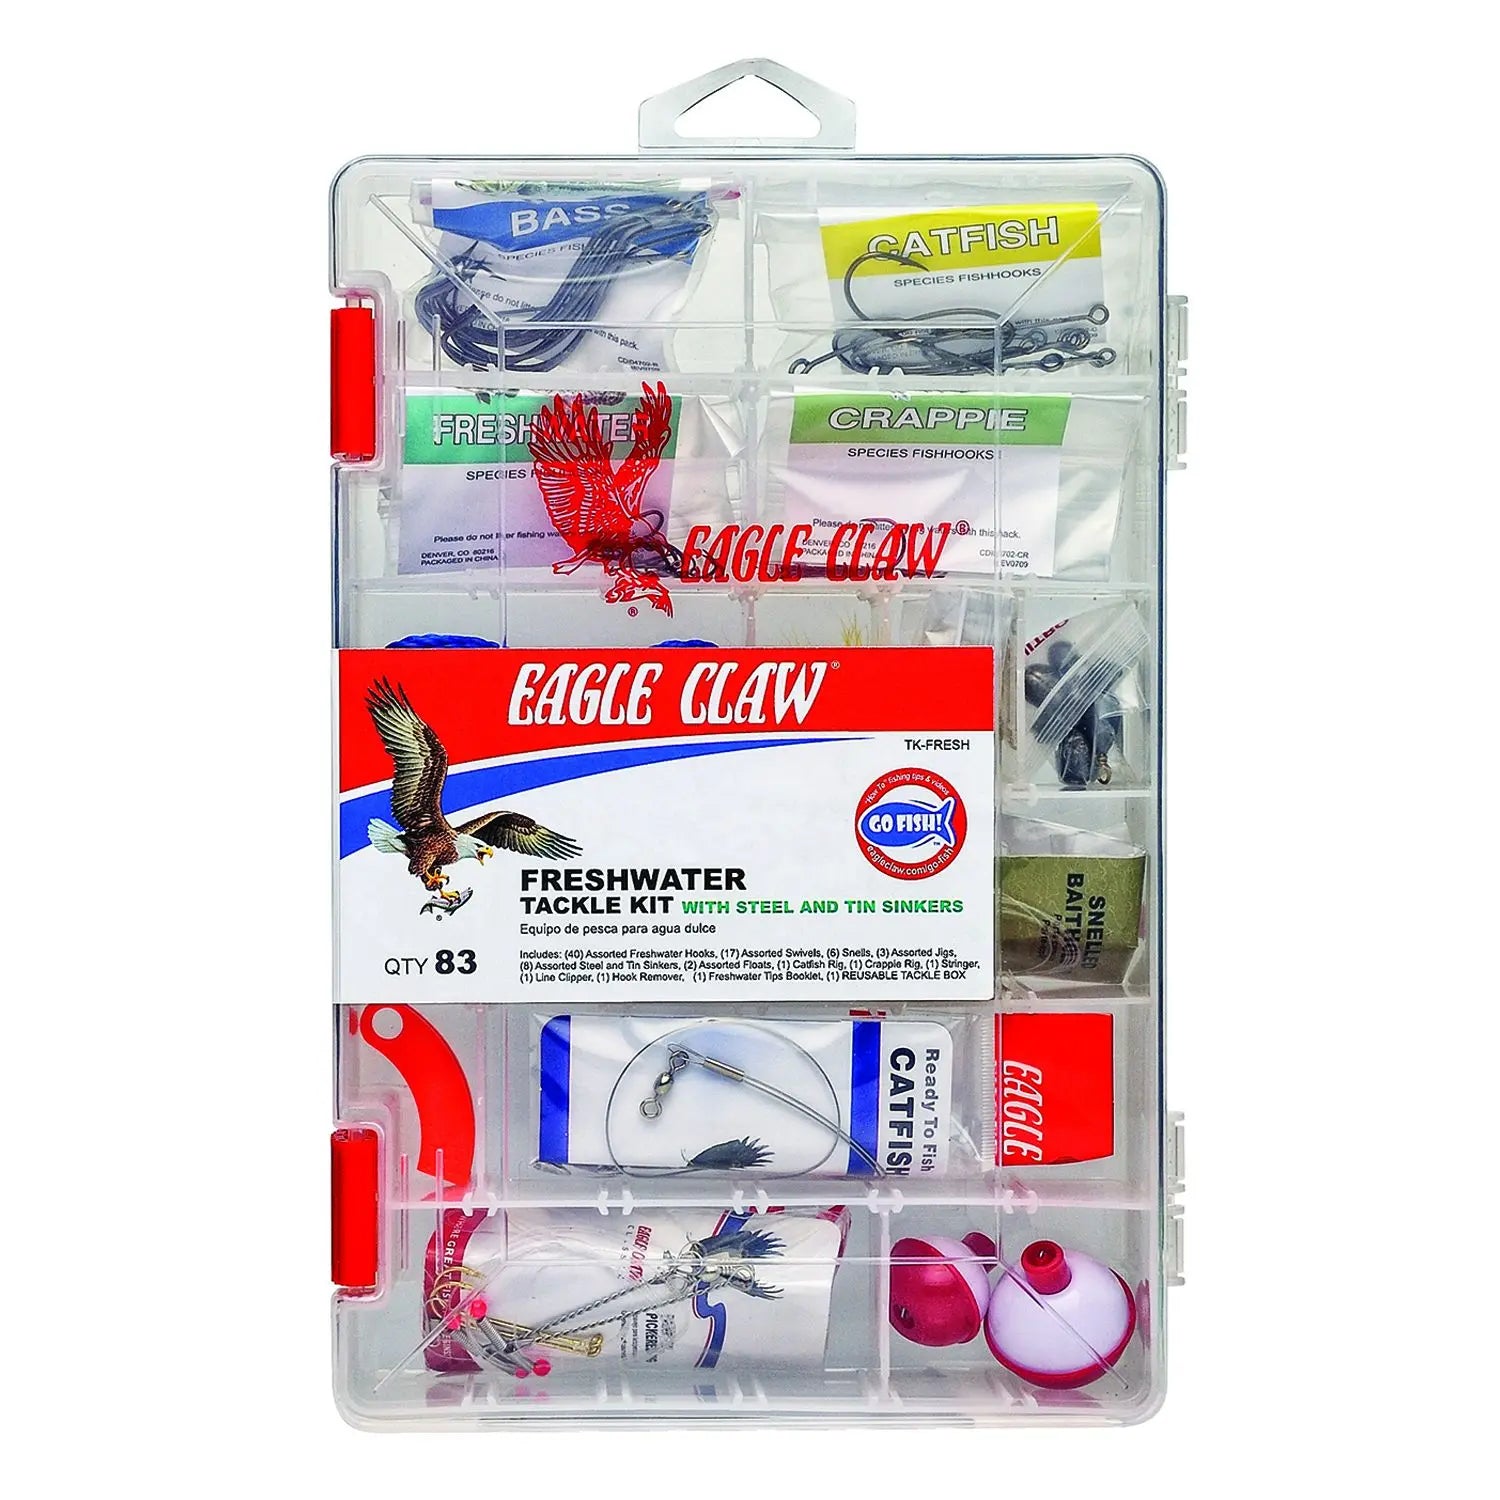 Eagle Claw Freshwater Tackle Kit, 80 Piece Eagle Claw